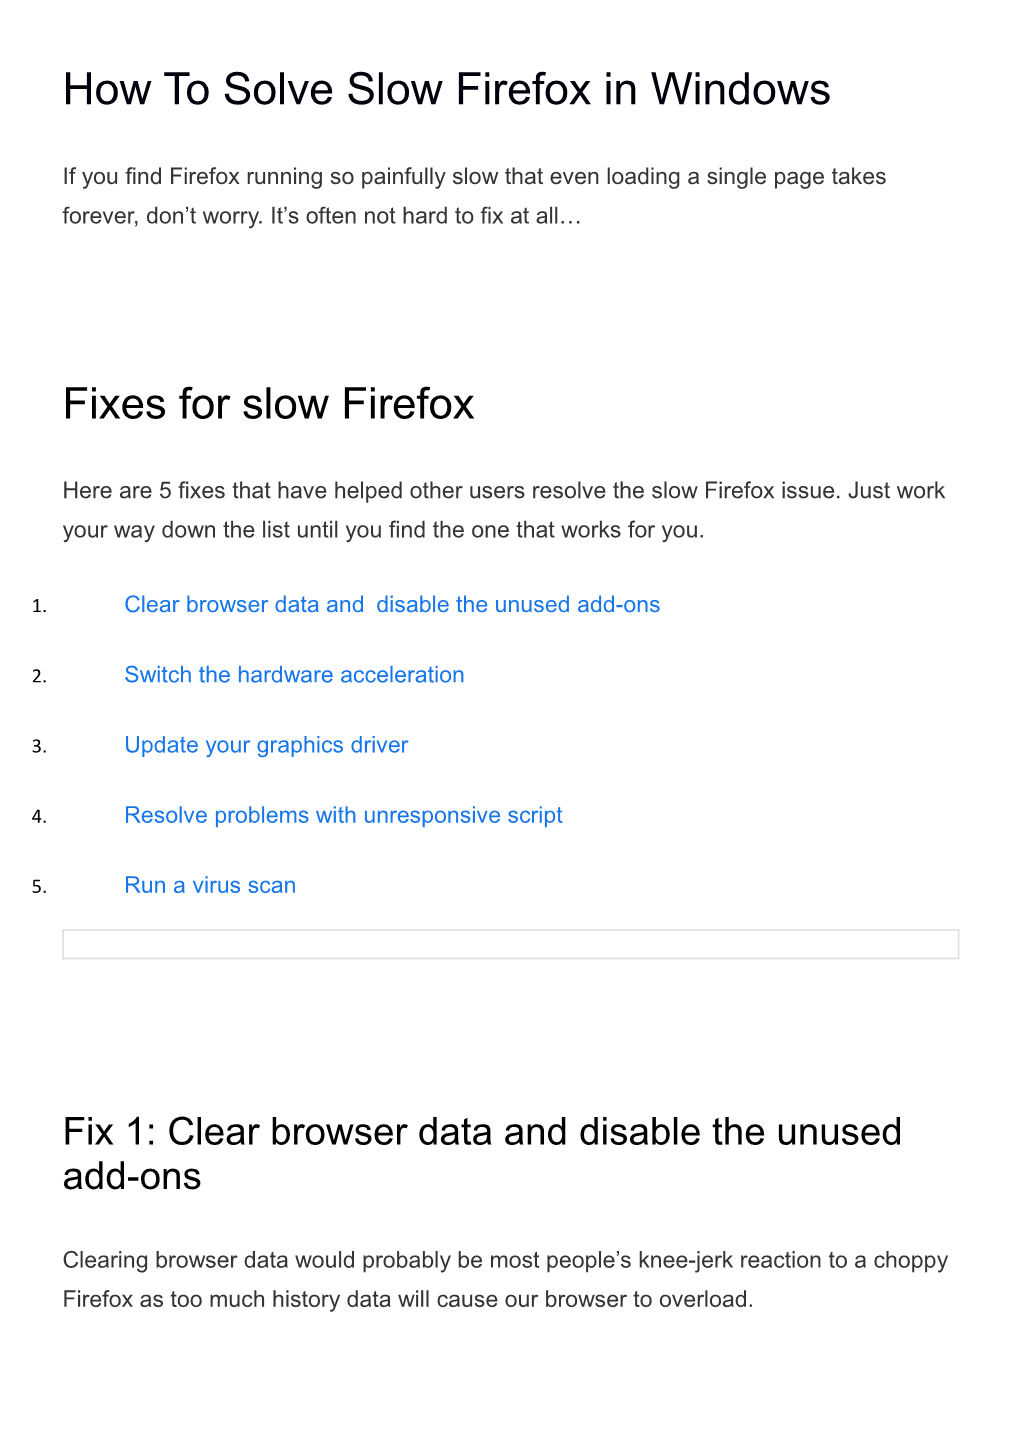 How to Solve Slow Firefox in Windows